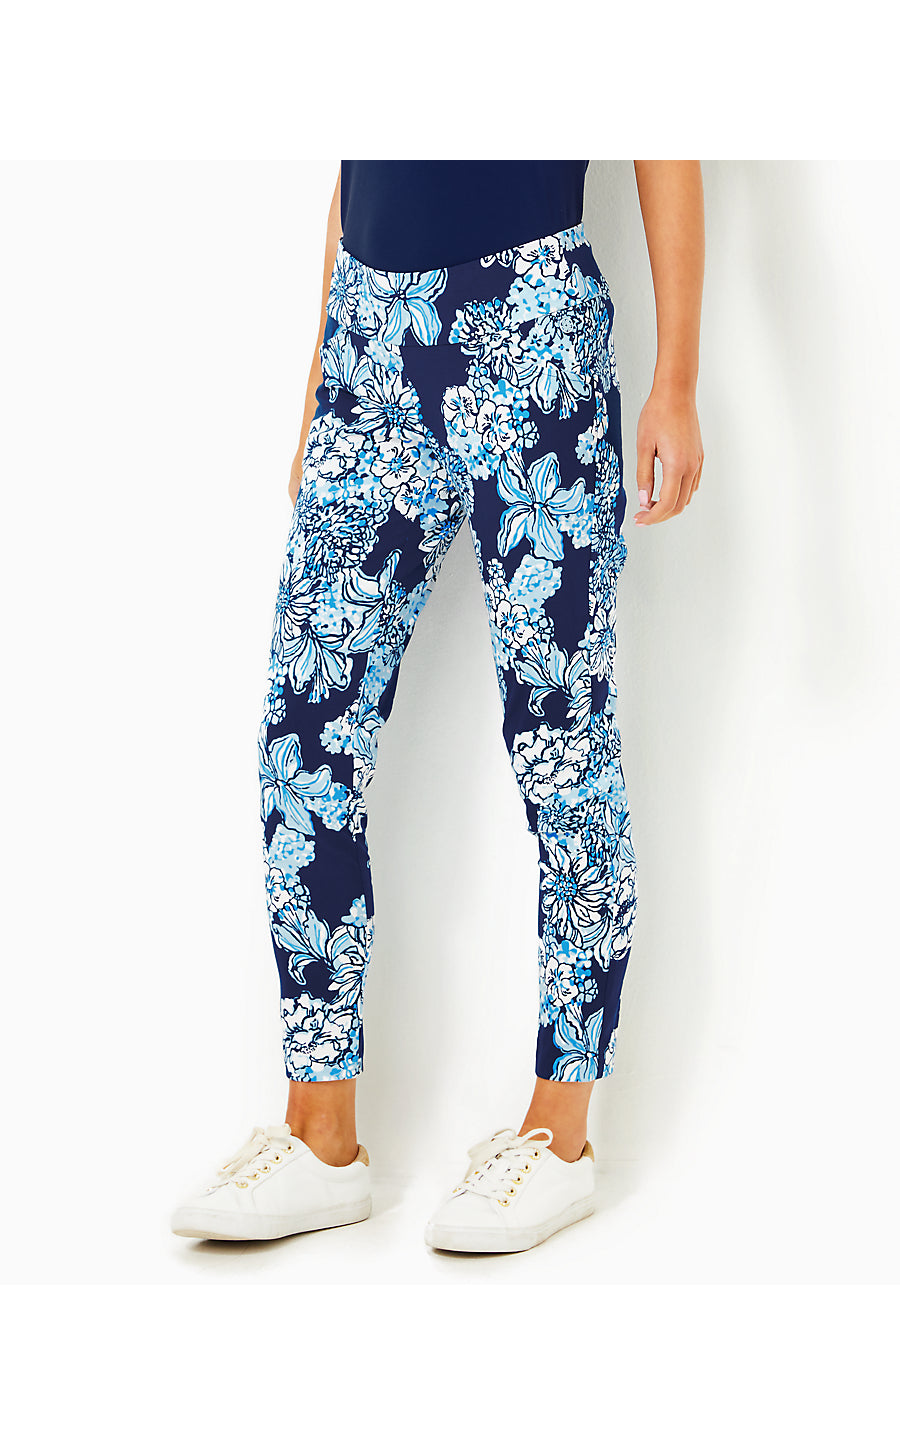 CORSO PANT - BOUQUET ALL DAY GOLF